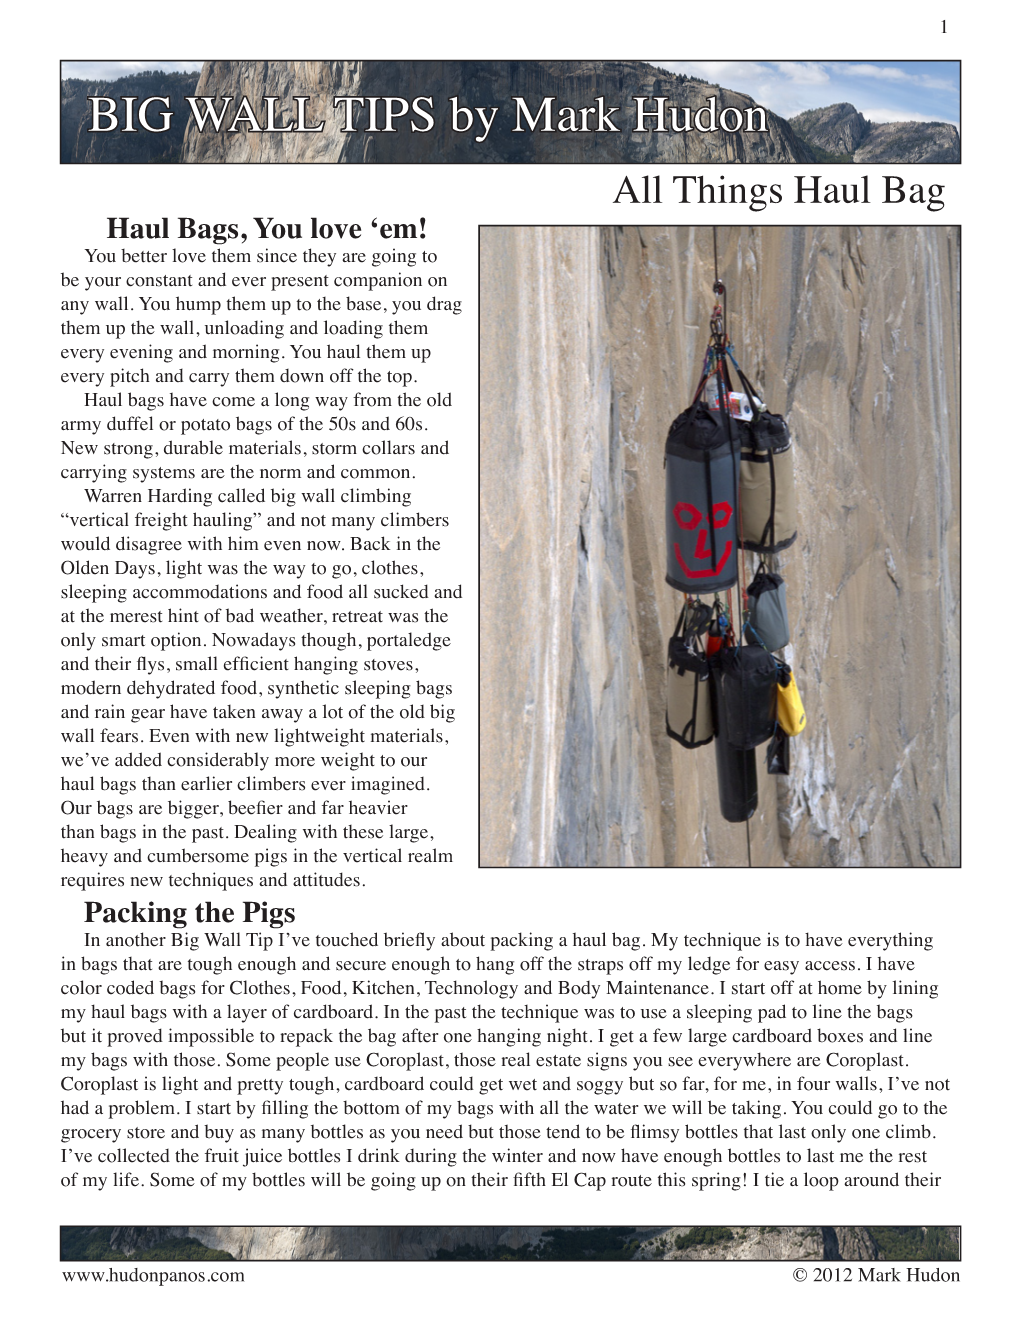 All Things Haul Bag Haul Bags, You Love ‘Em! You Better Love Them Since They Are Going to Be Your Constant and Ever Present Companion on Any Wall